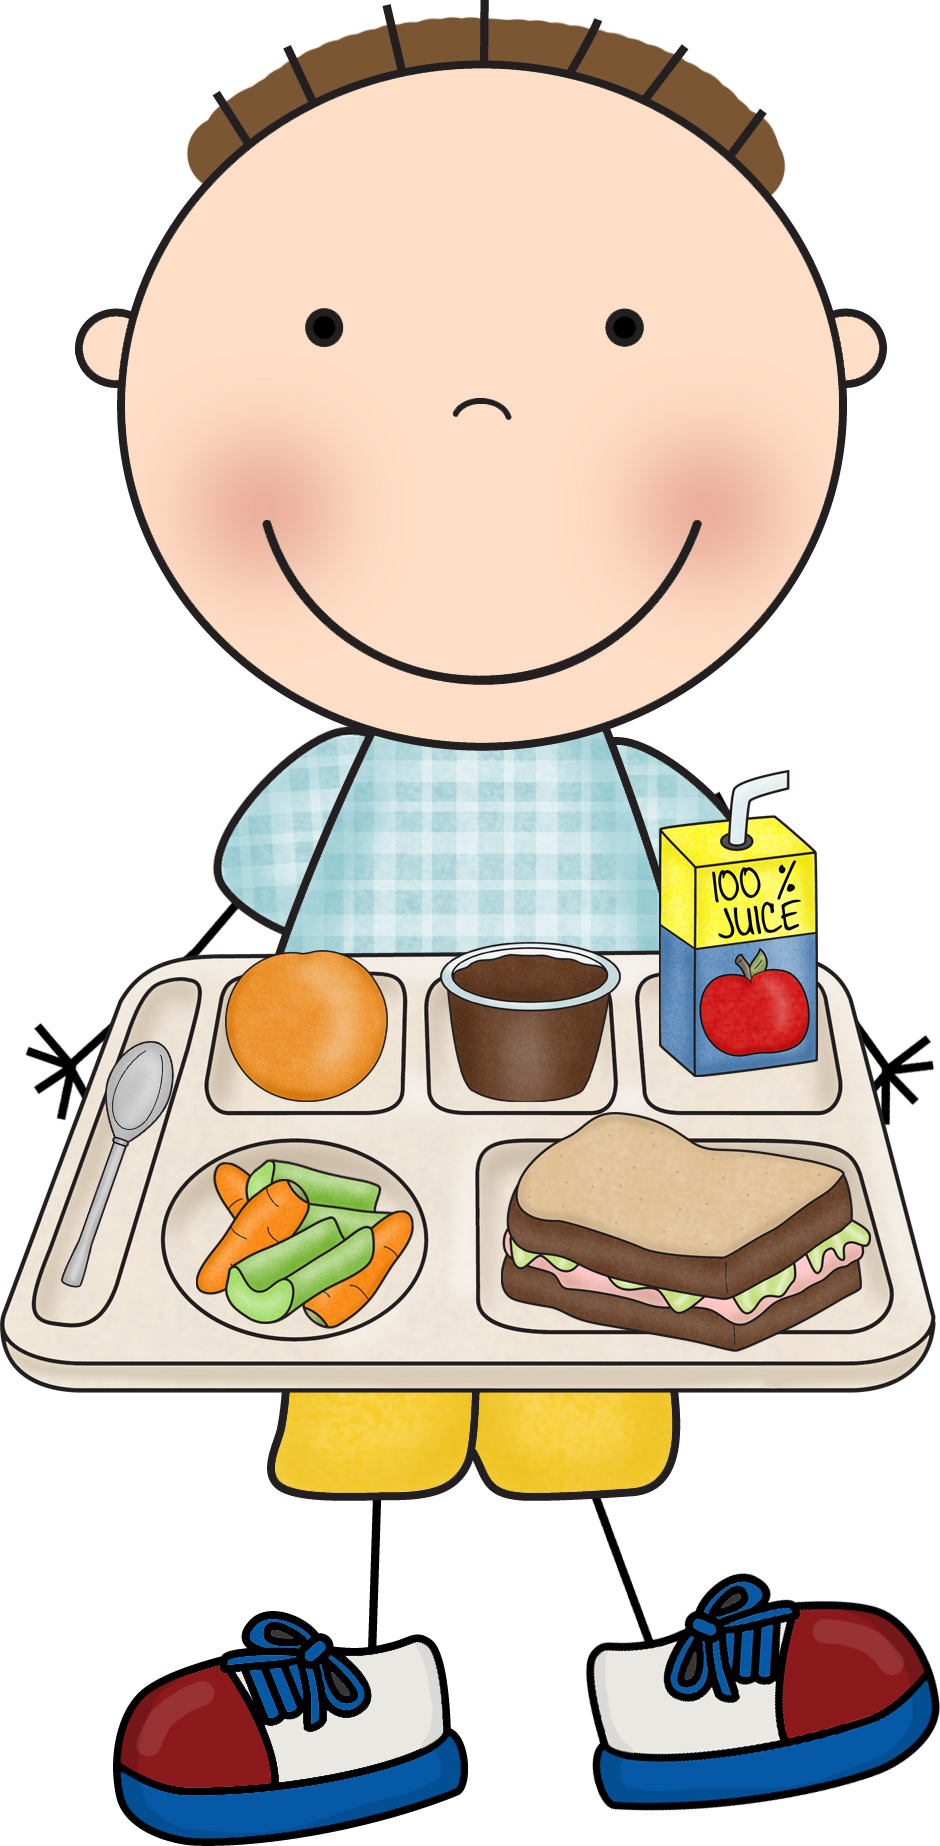 Lunch Images 3 Hd Image Clipart